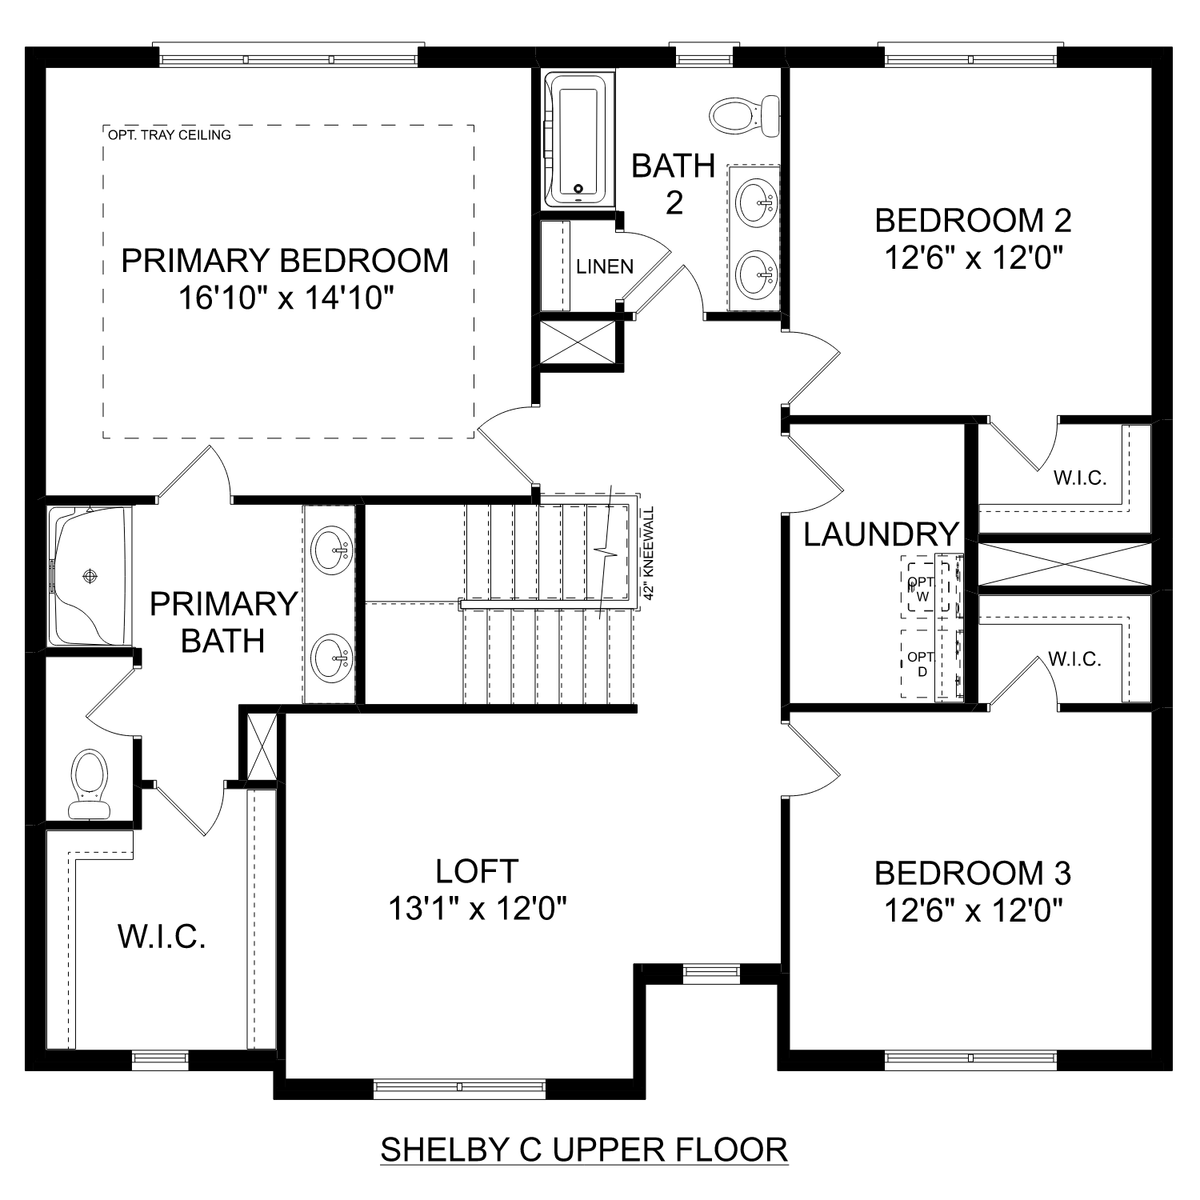 2 - The Shelby C floor plan layout for 327 Creek Grove Avenue in Davidson Homes' Creek Grove community.